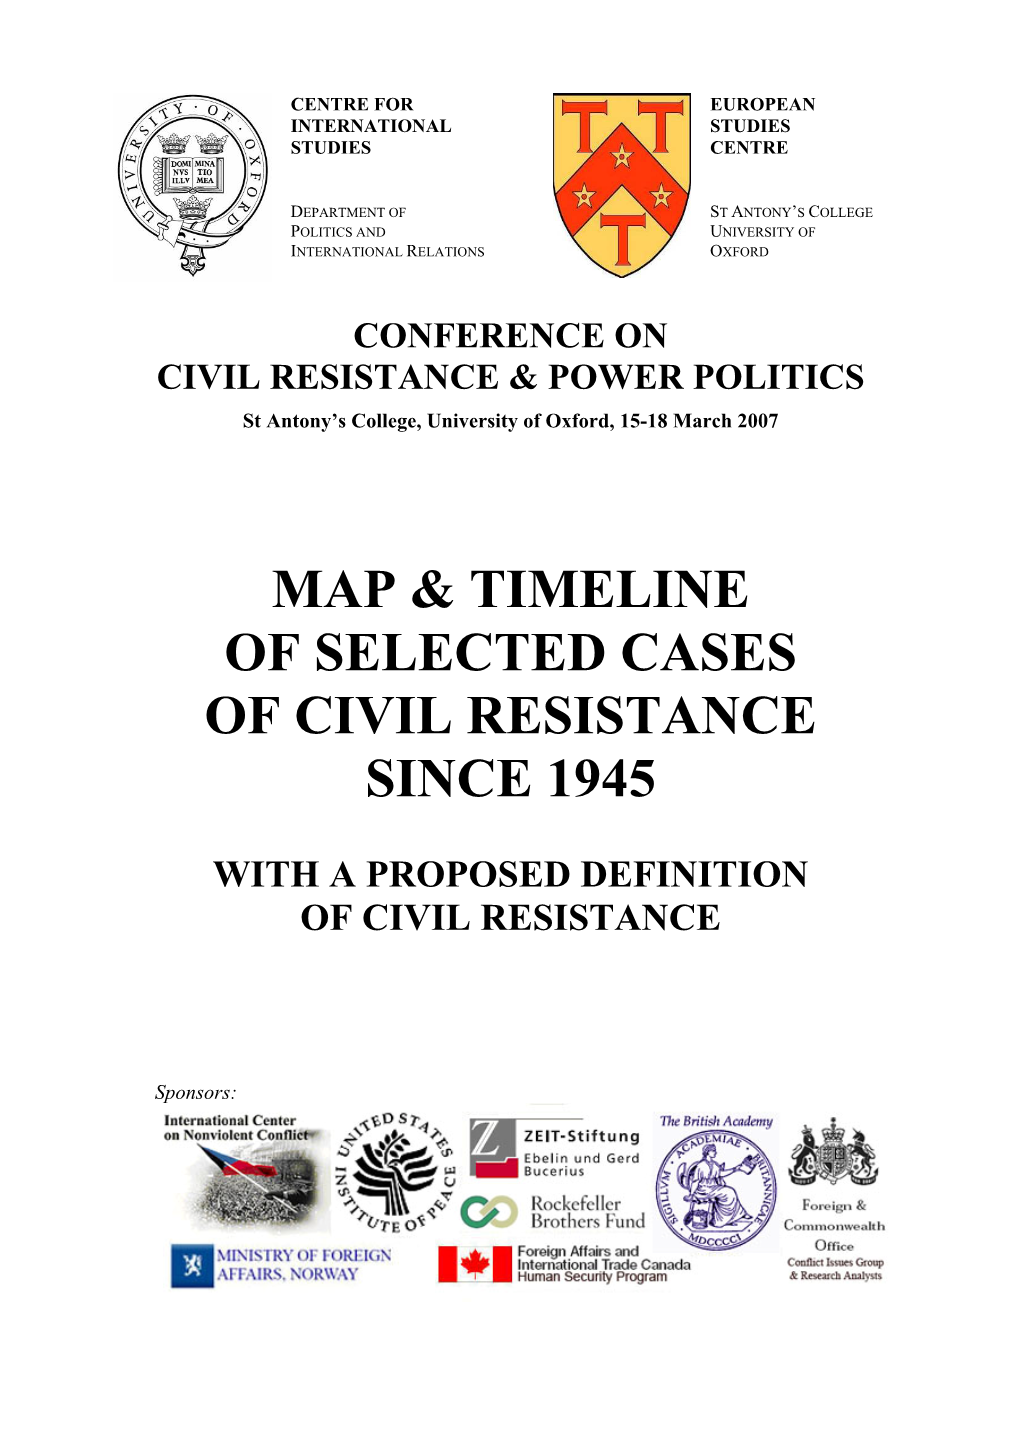 Map & Timeline of Selected Cases of Civil Resistance